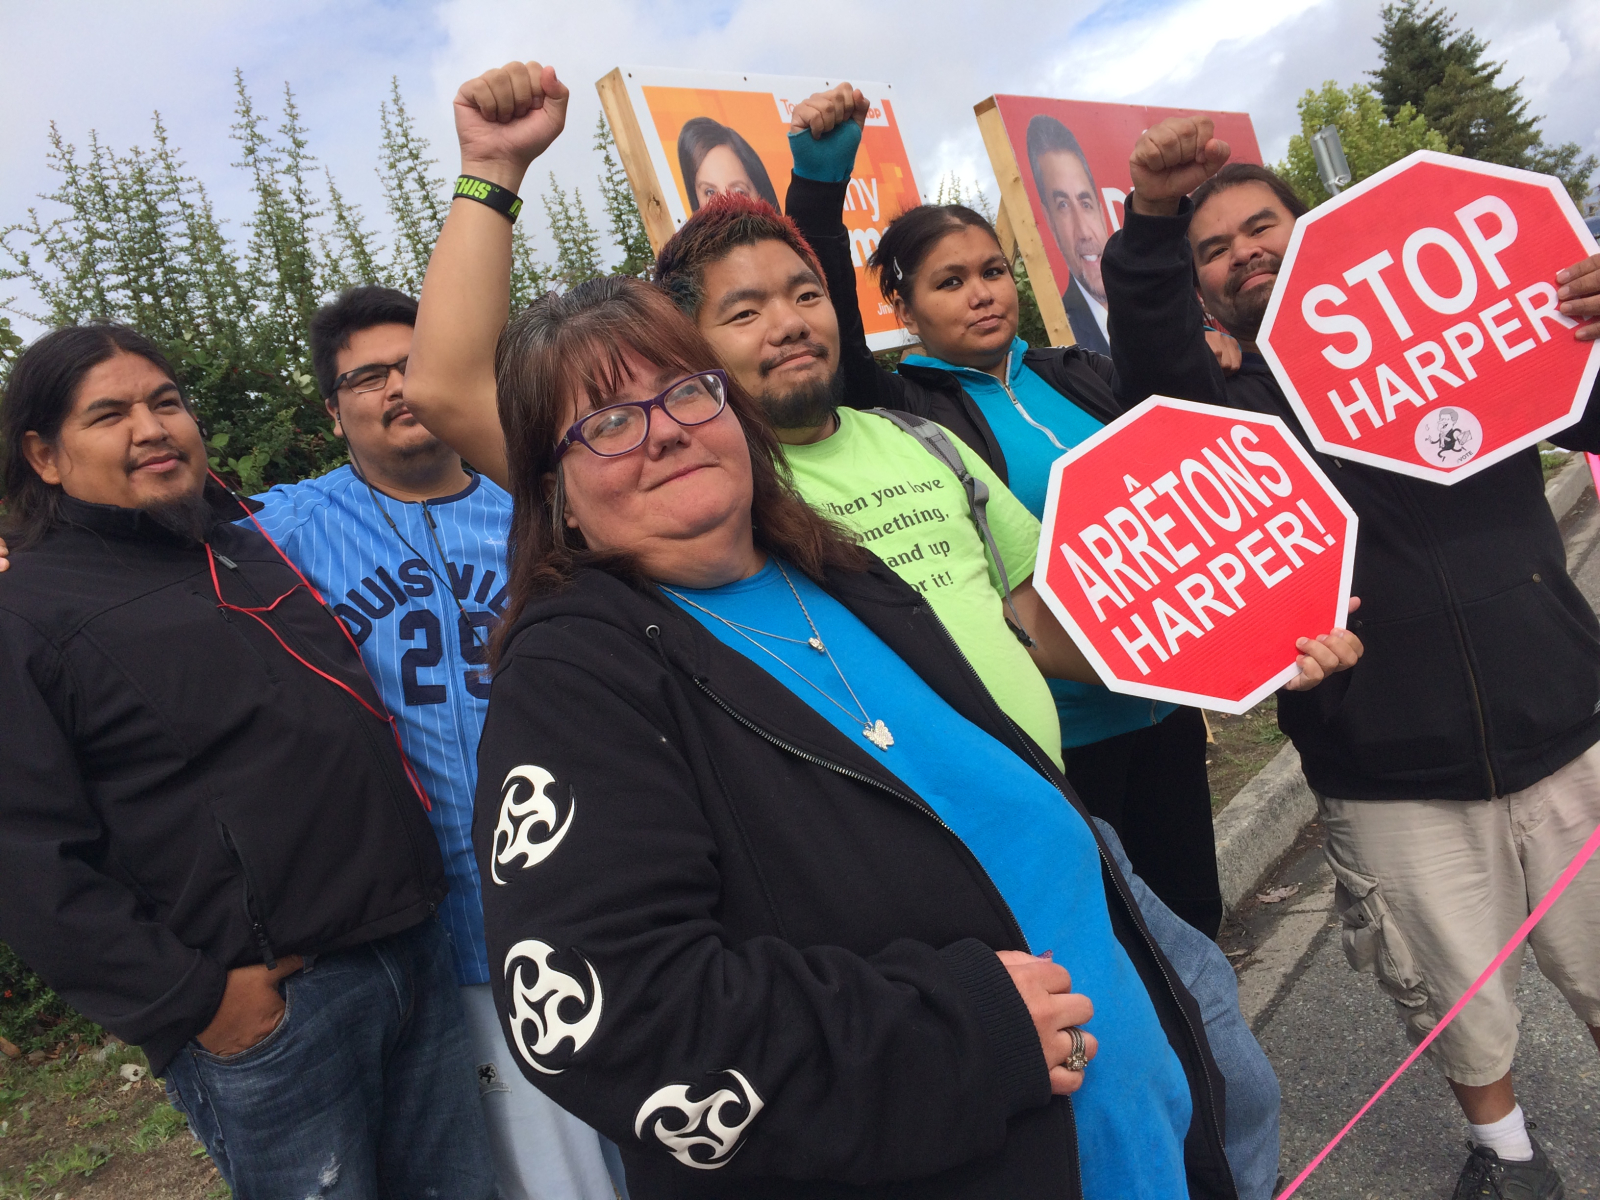 Lisa Arlin and Stop Harper protesters at Conservative election rally in Surrey, B.C. - Mychaylo Prystupa